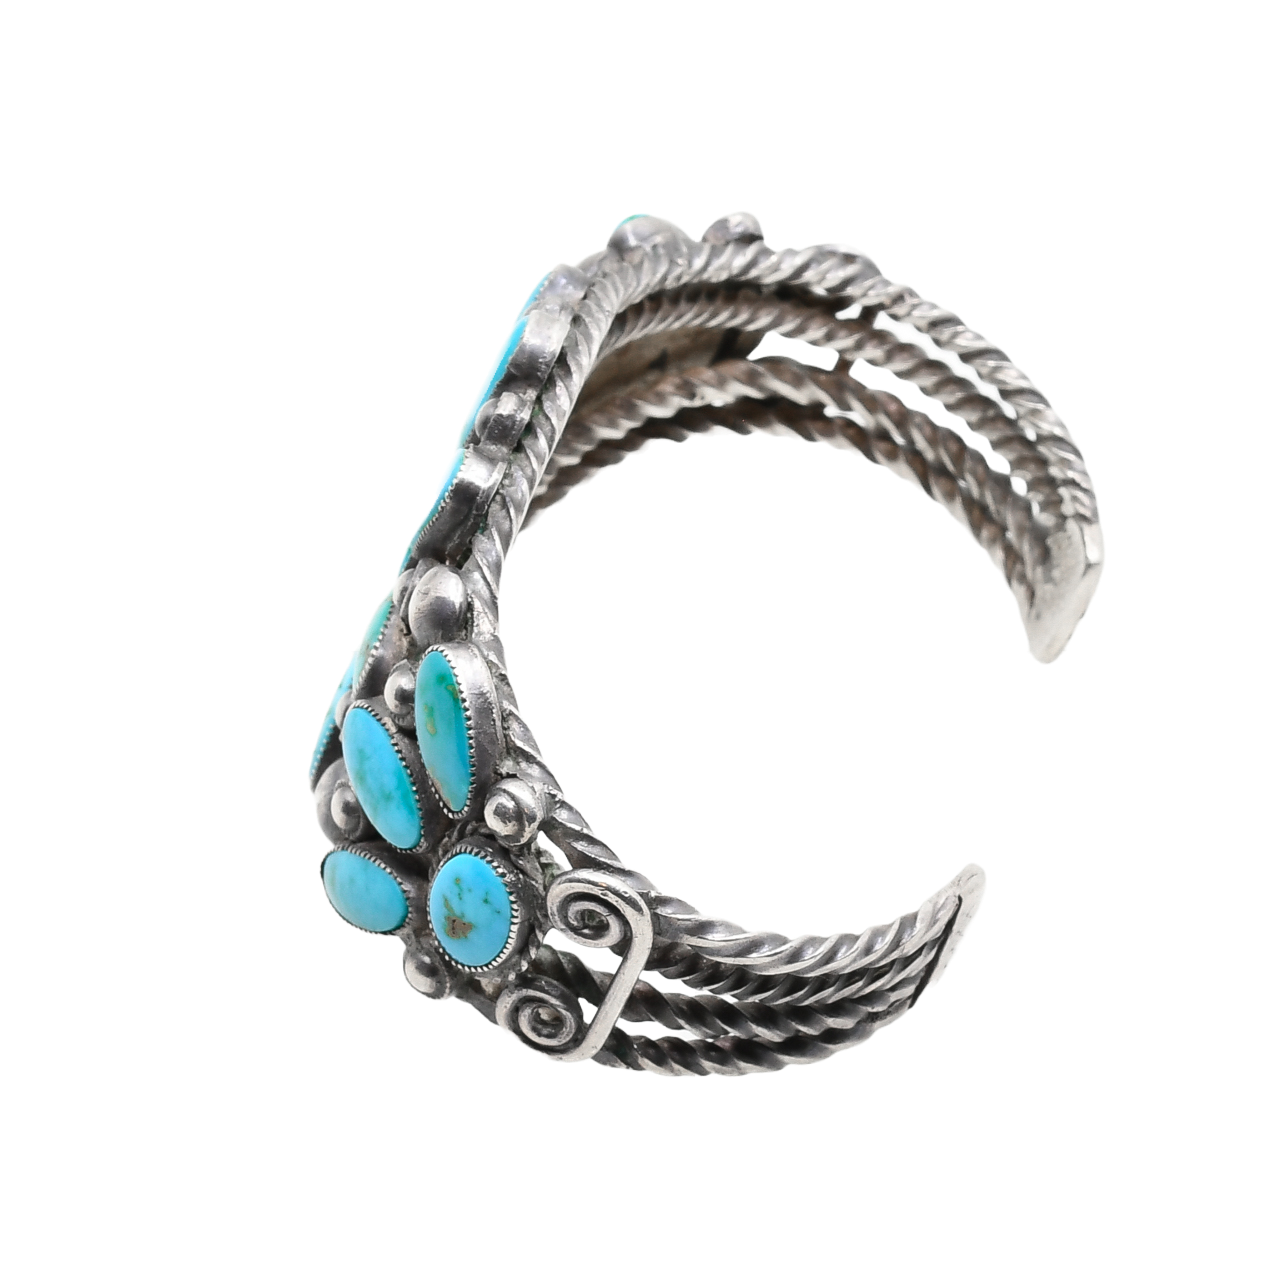 Old Navajo Blue Gem Turquoise Bracelet of Twisted Wire